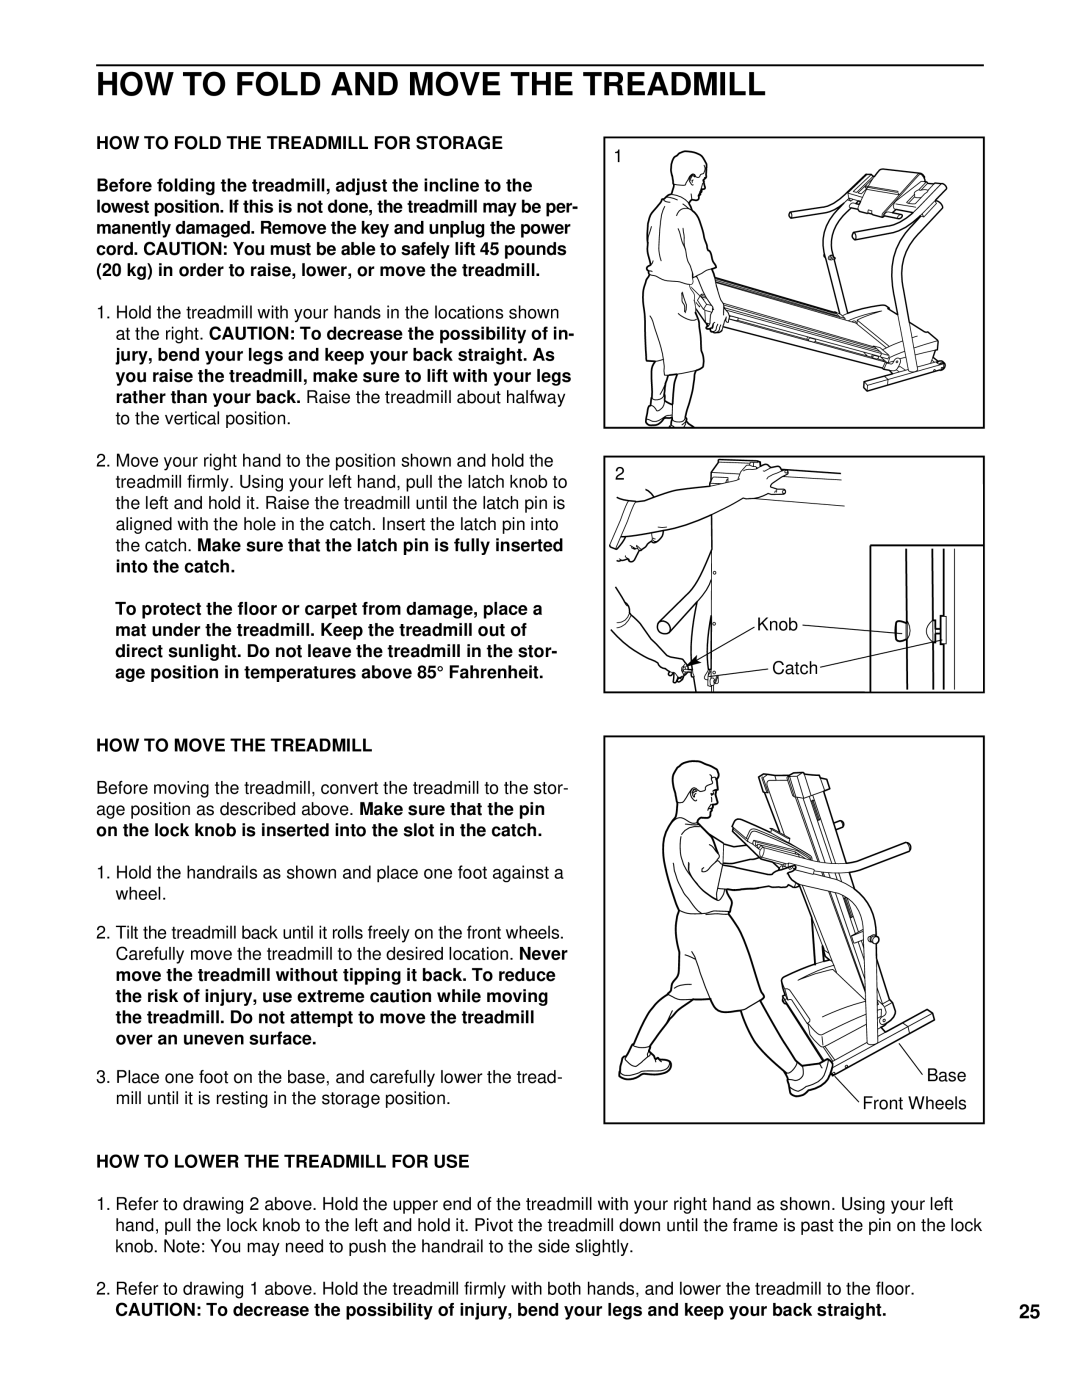 NordicTrack NTTL11994 HOW to Fold and Move the Treadmill, HOW to Fold the Treadmill for Storage, HOW to Move the Treadmill 